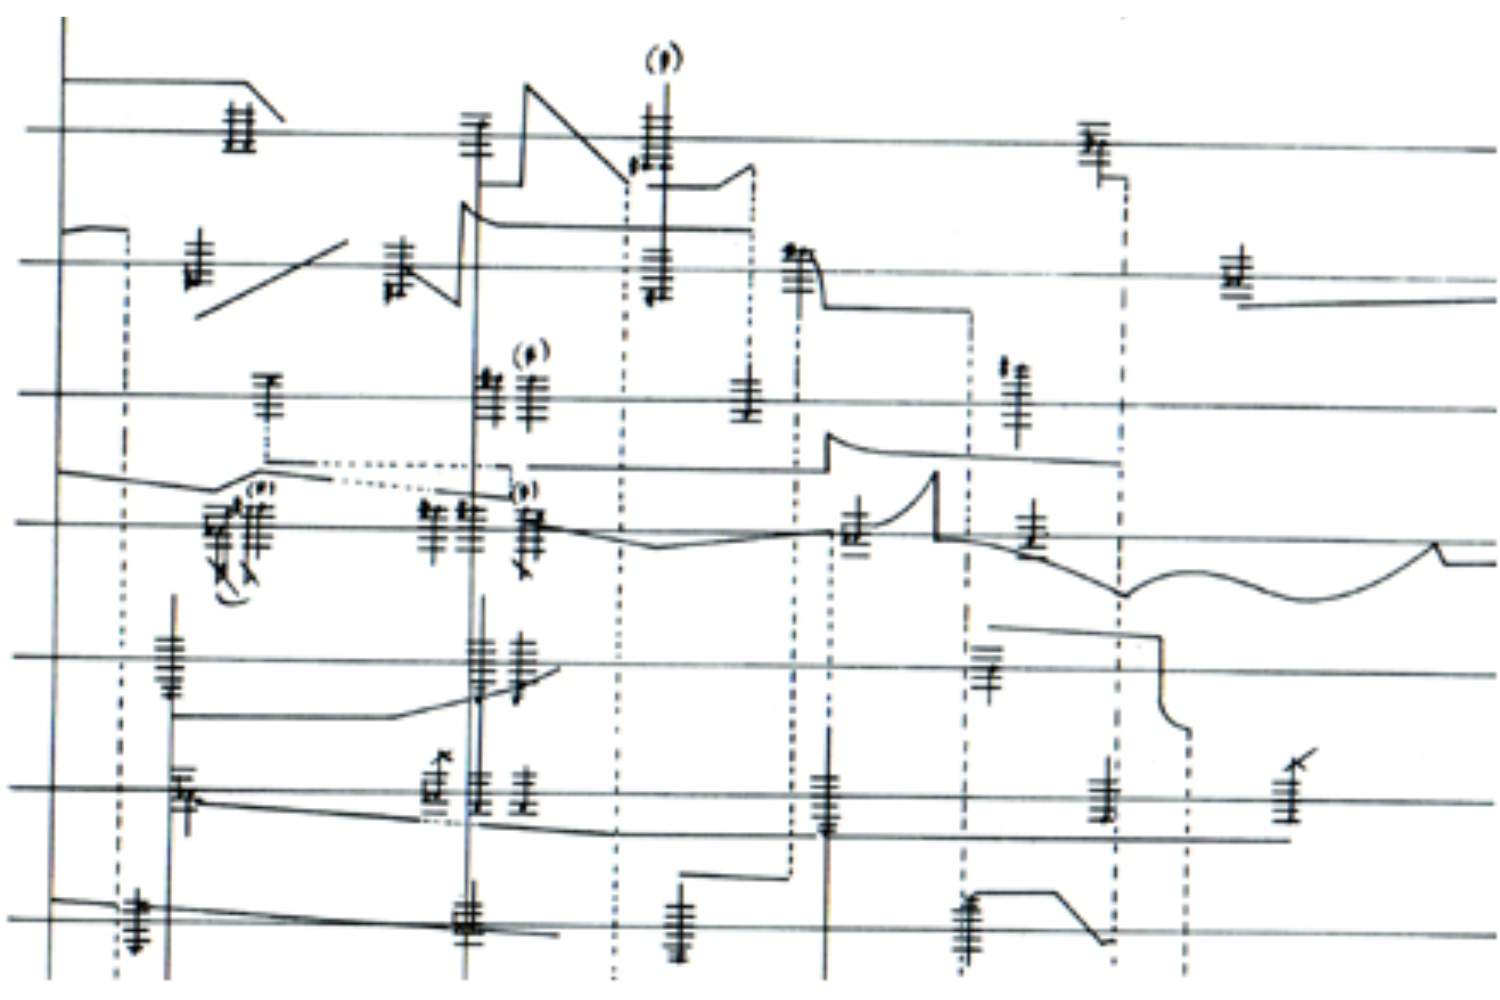 A music score from Aldo Clementi for his Informel 2